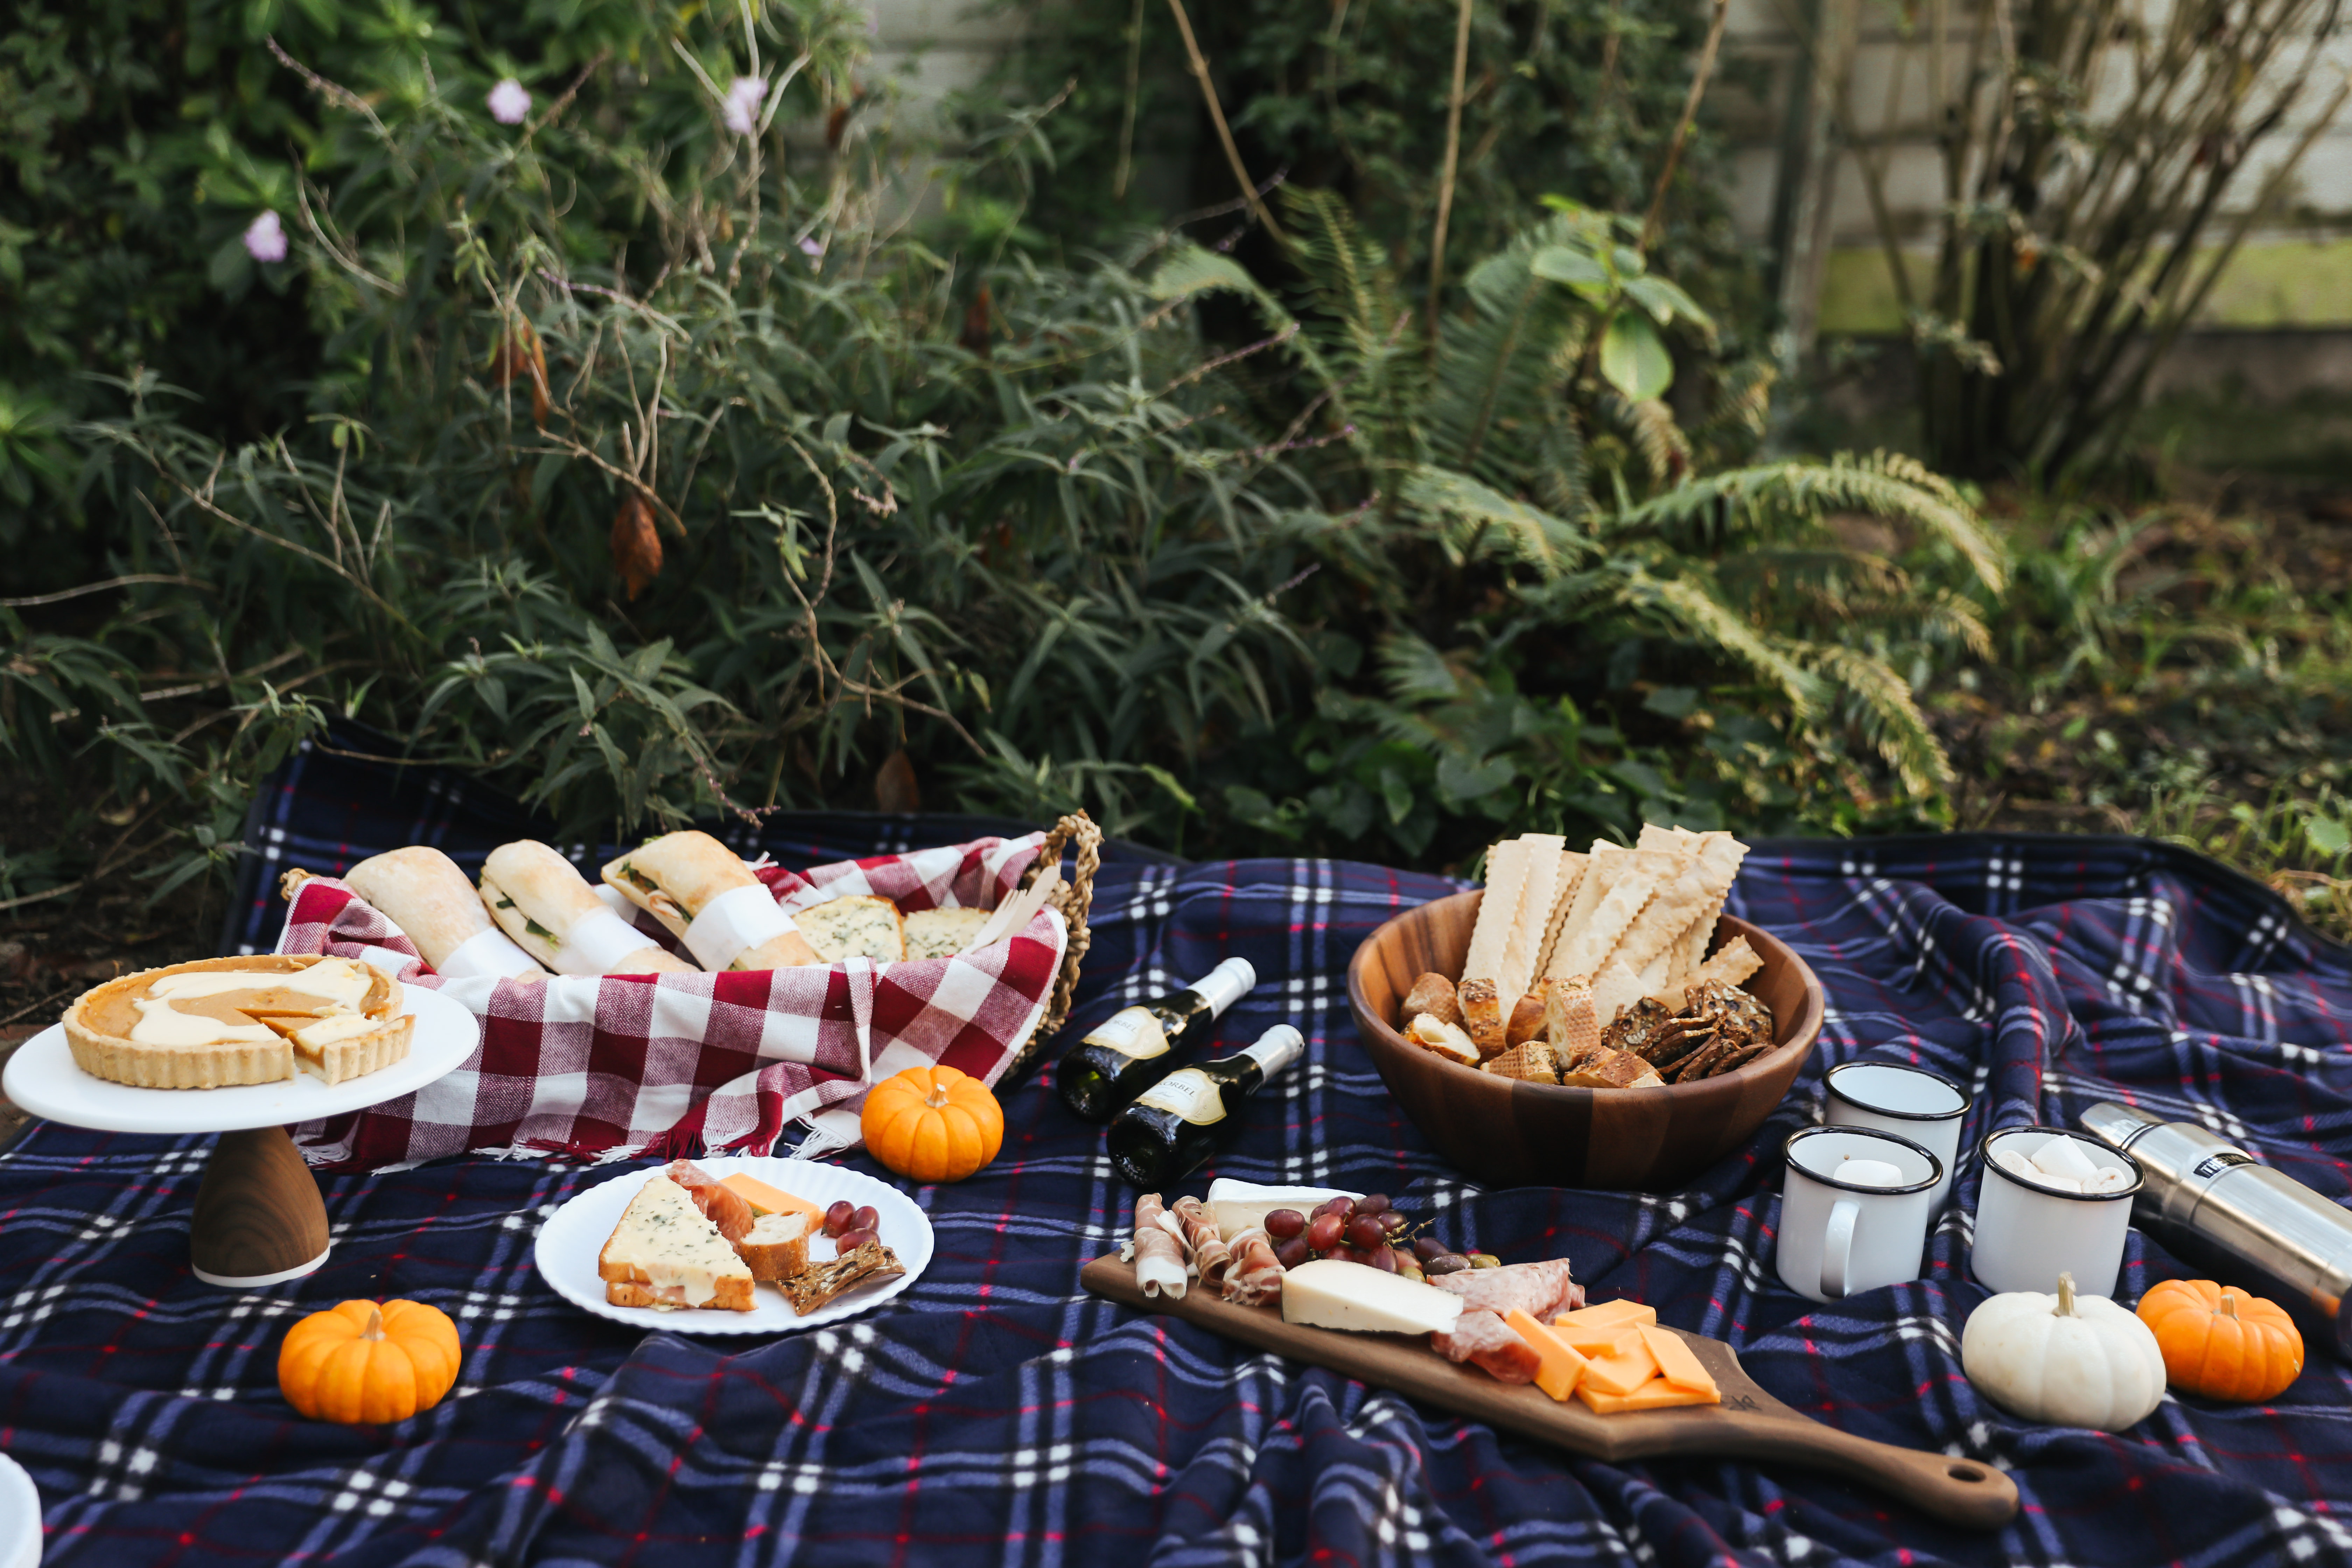 A Friendsgiving Picnic with Help from Uber.